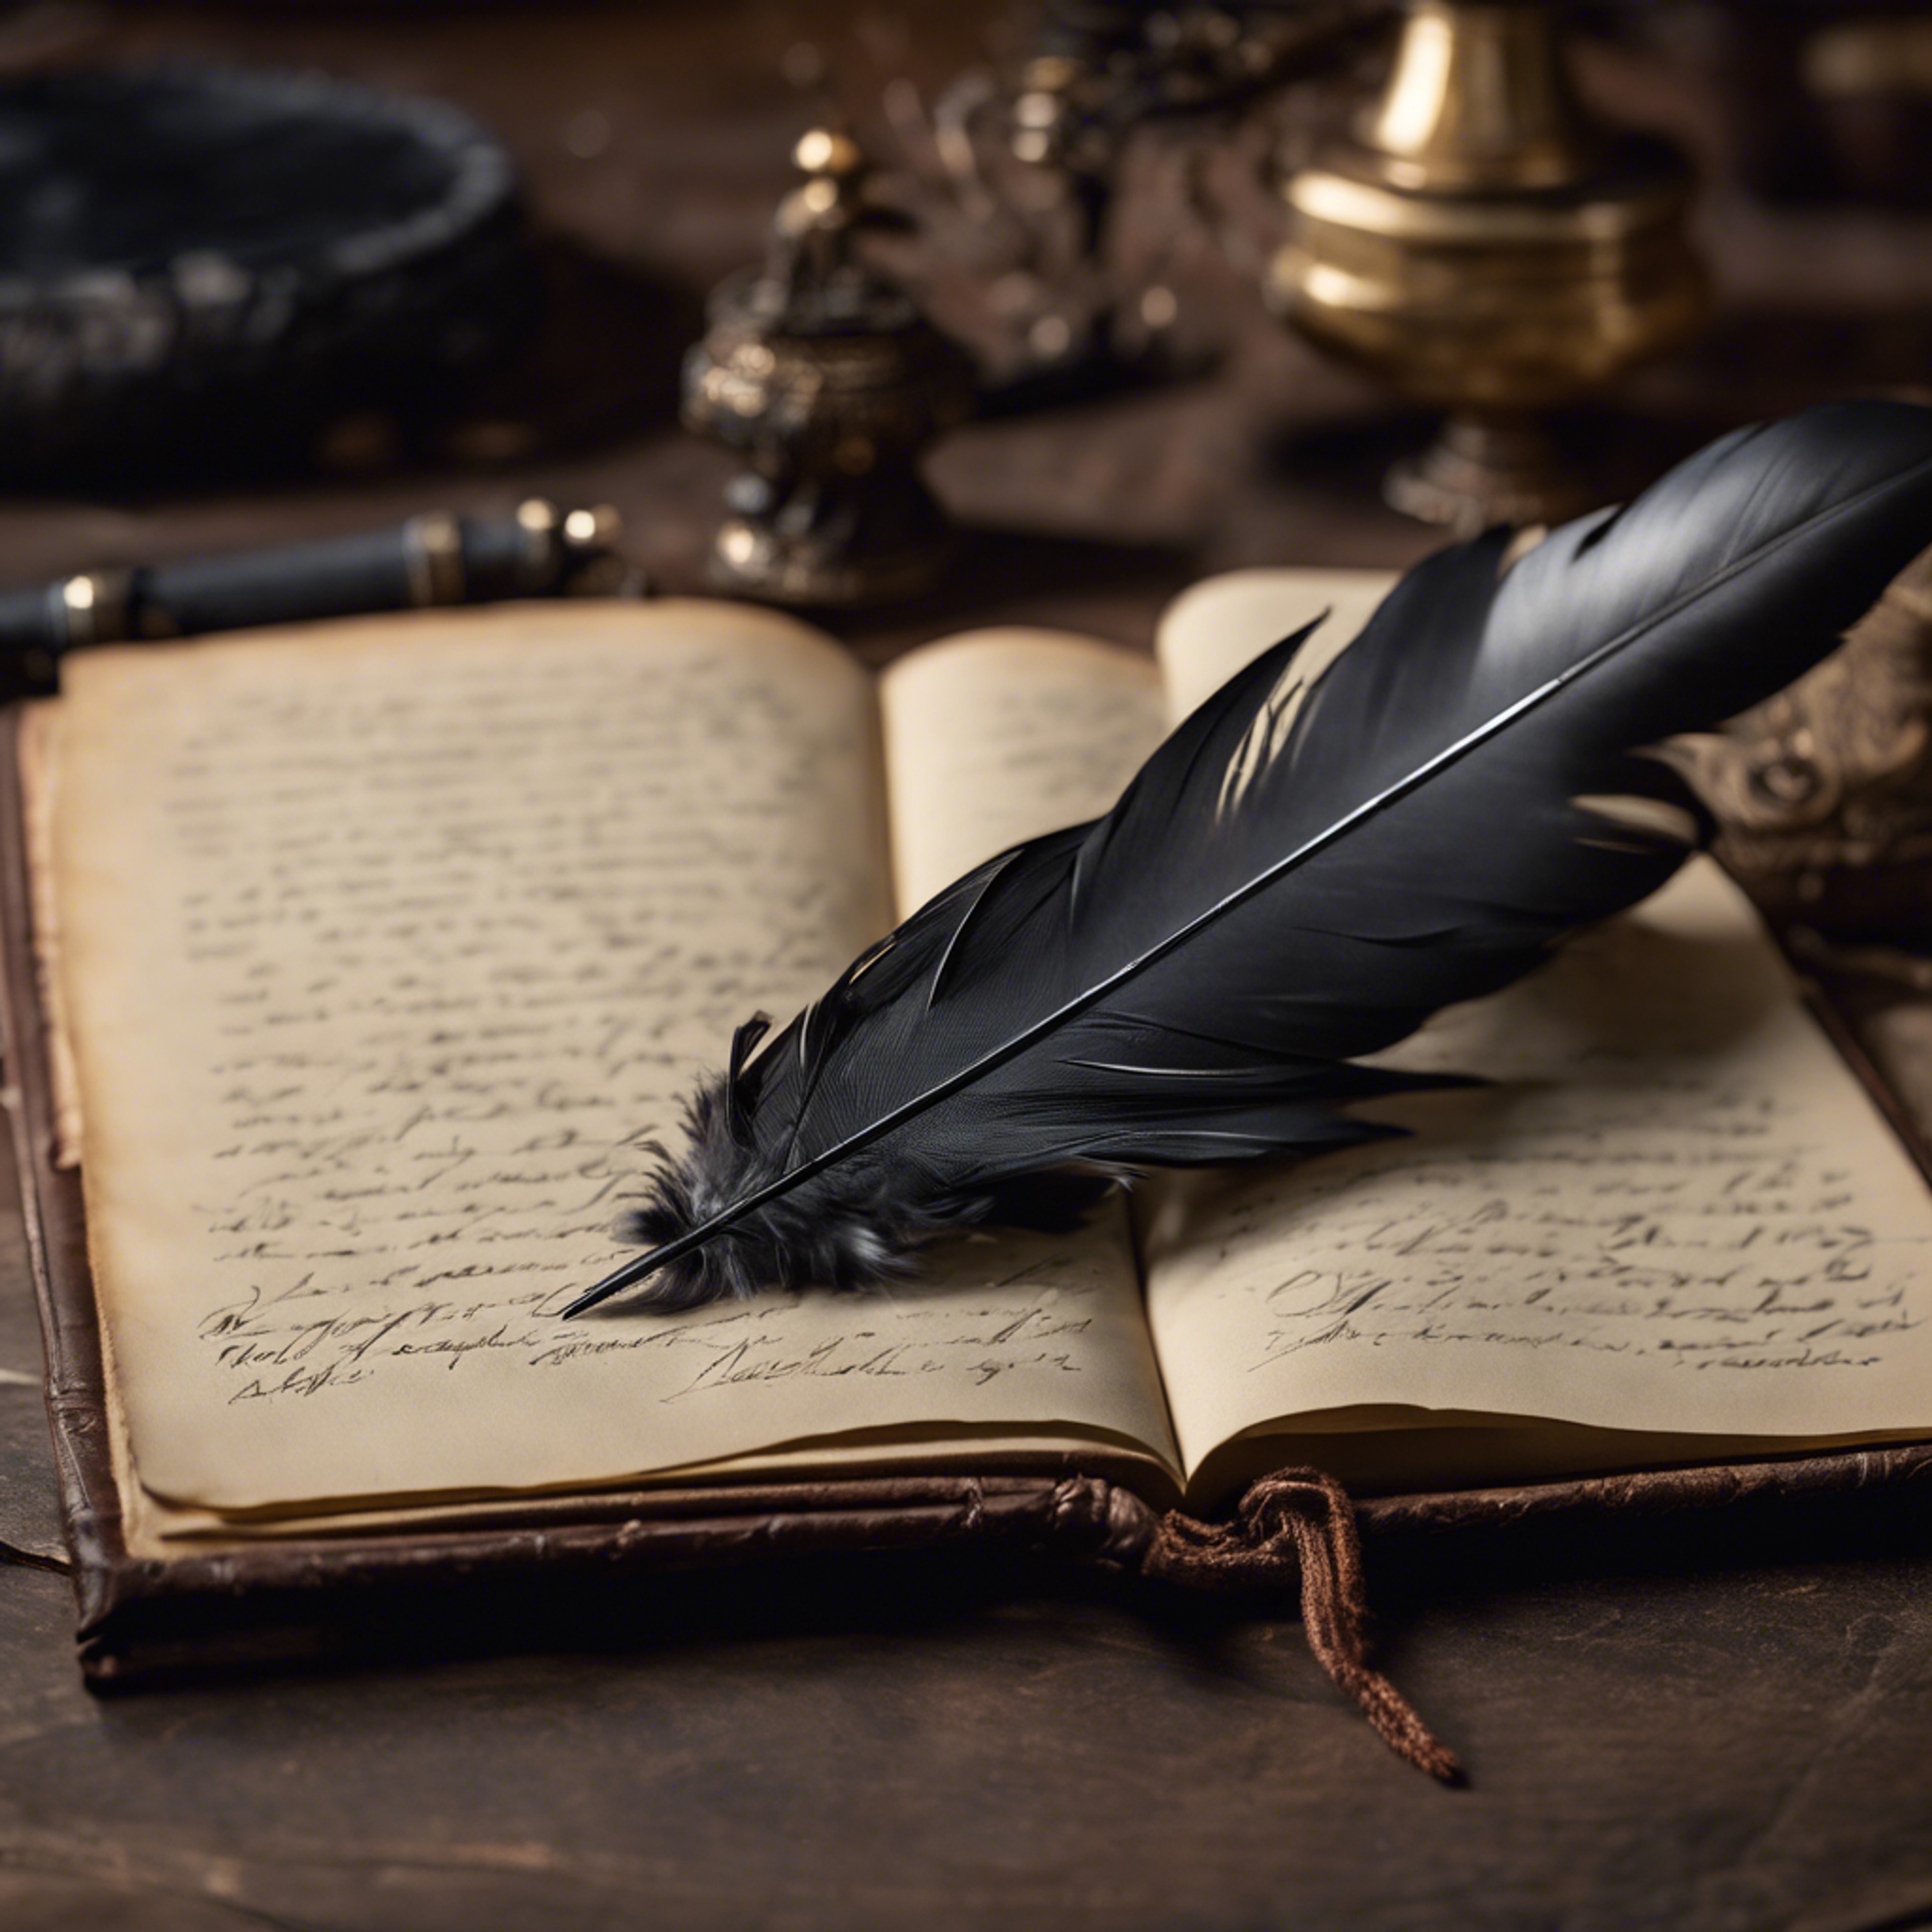 A black feather quill pen poised to write in an antique leather-bound journal. Ταπετσαρία[1a576fd5c1f949af9941]